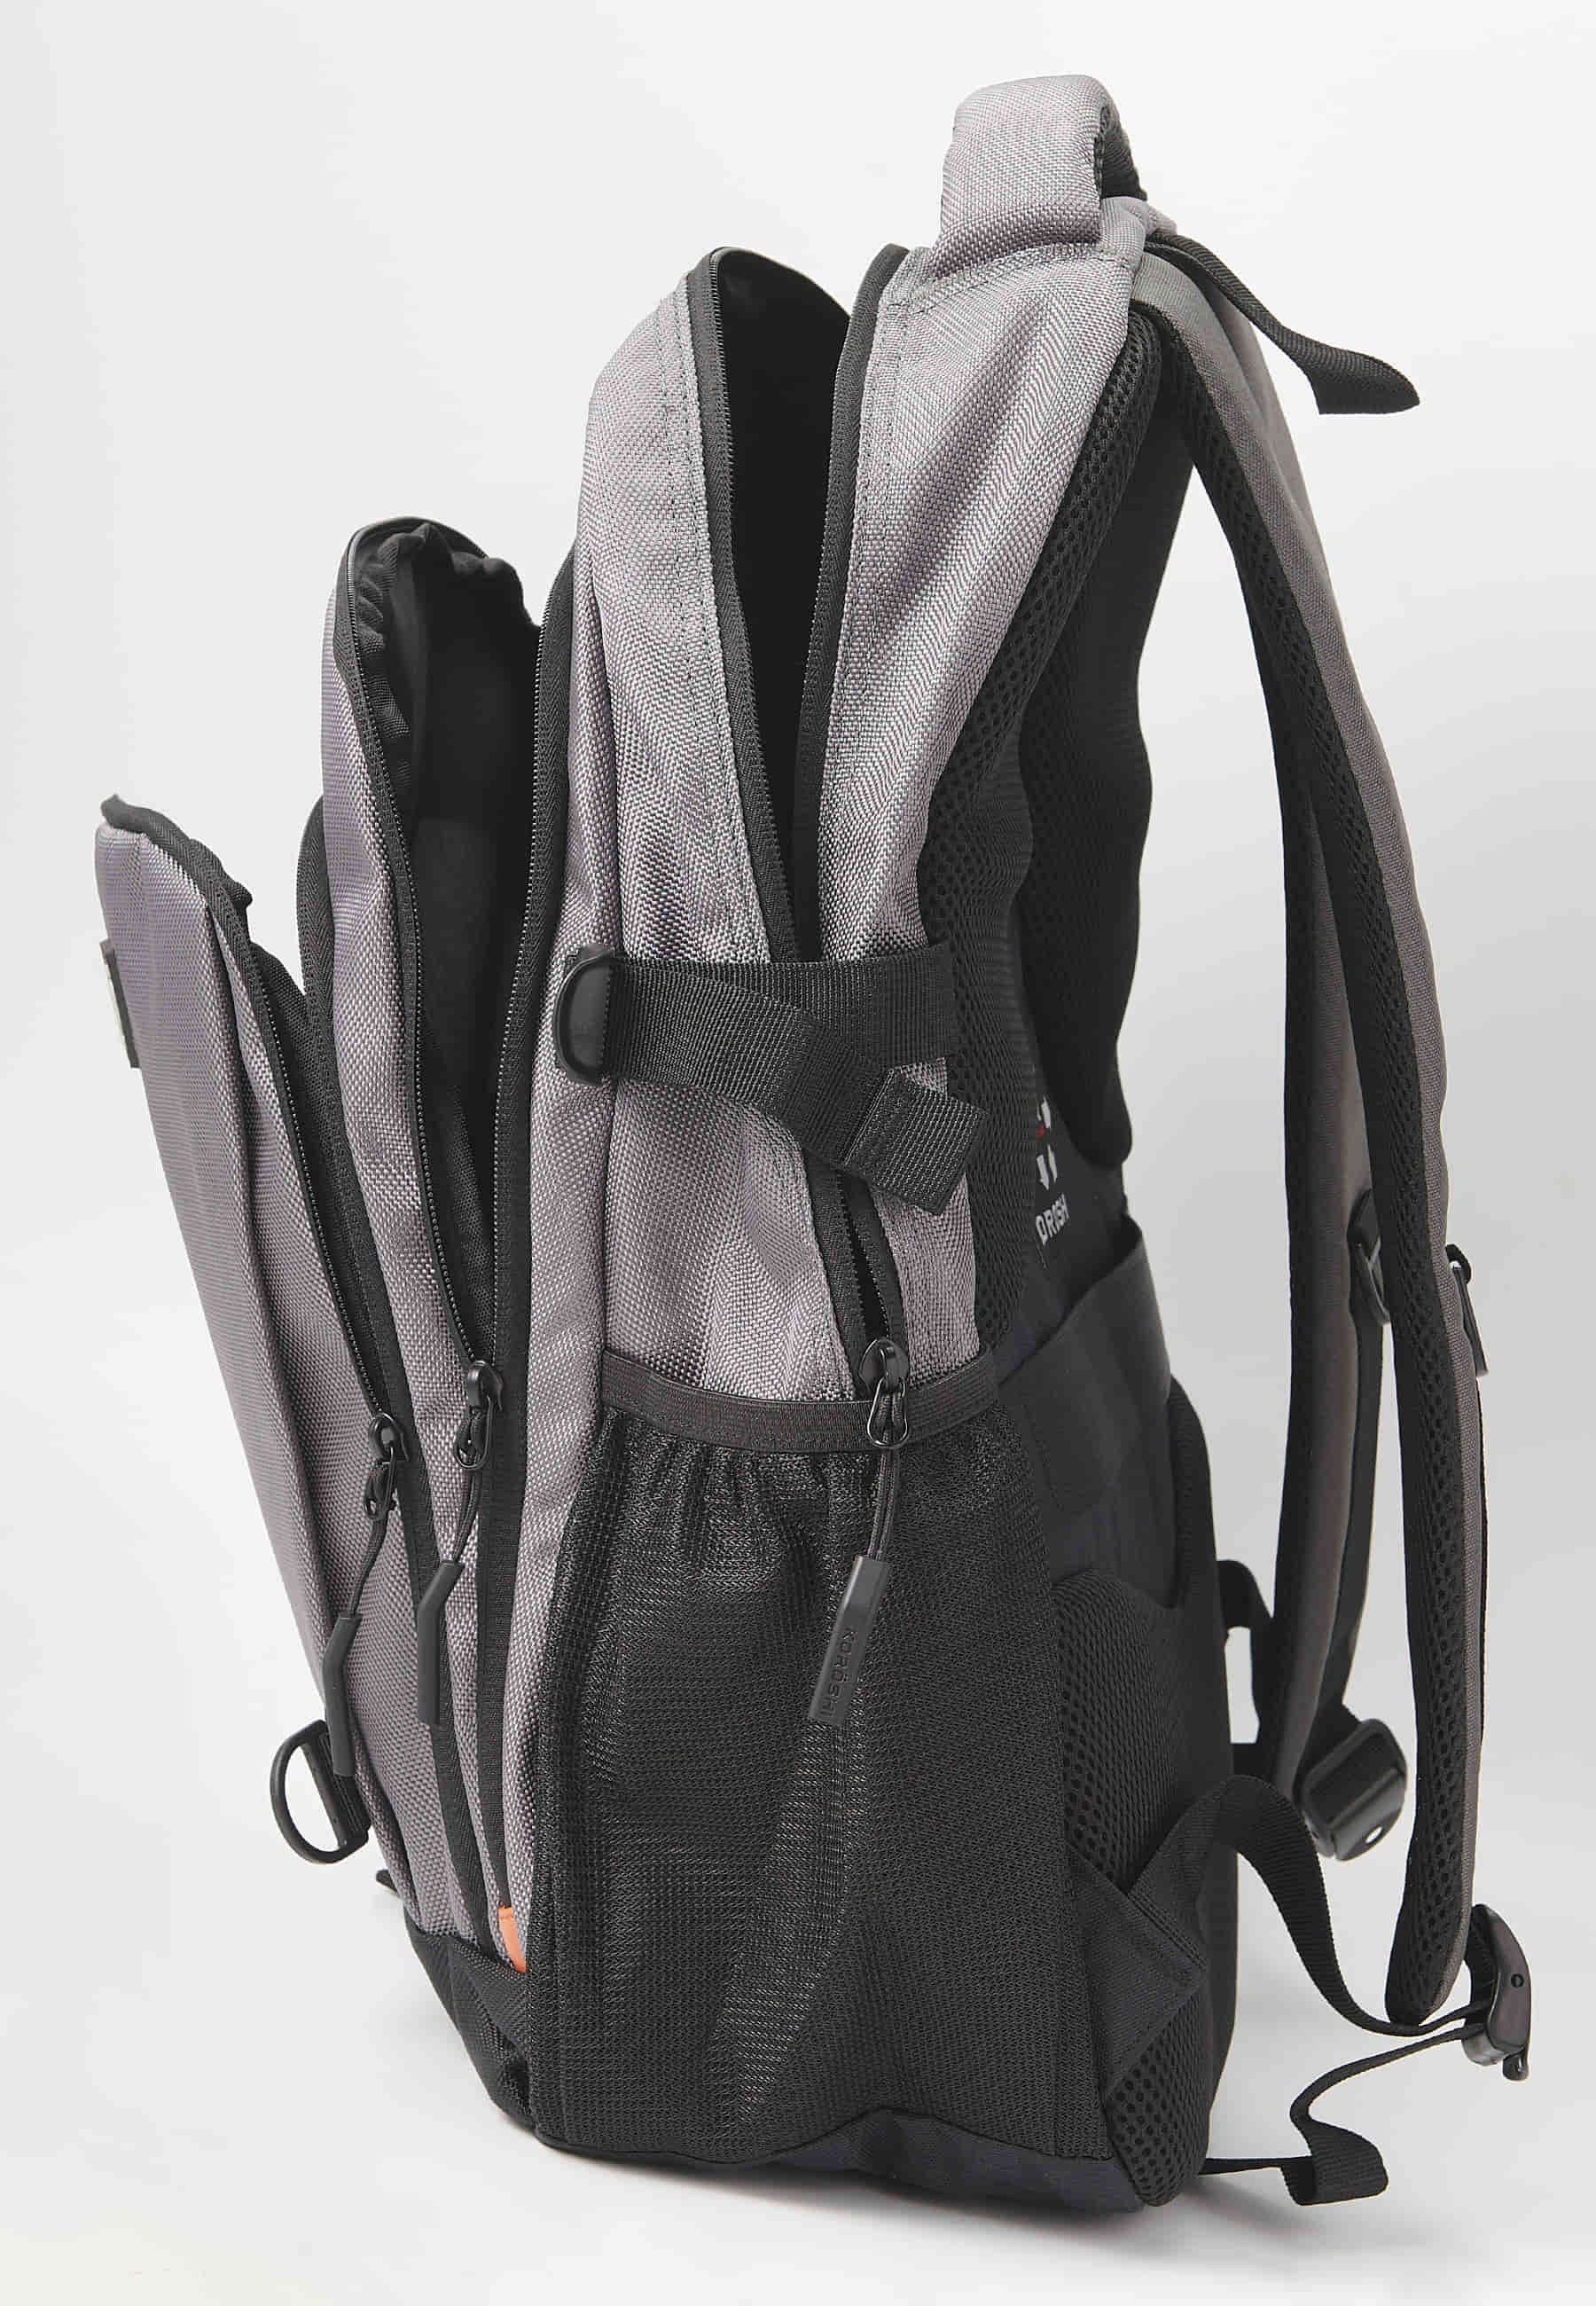 Koröshi backpack with three zippered compartments, one for laptop, with Gray interior pockets 2